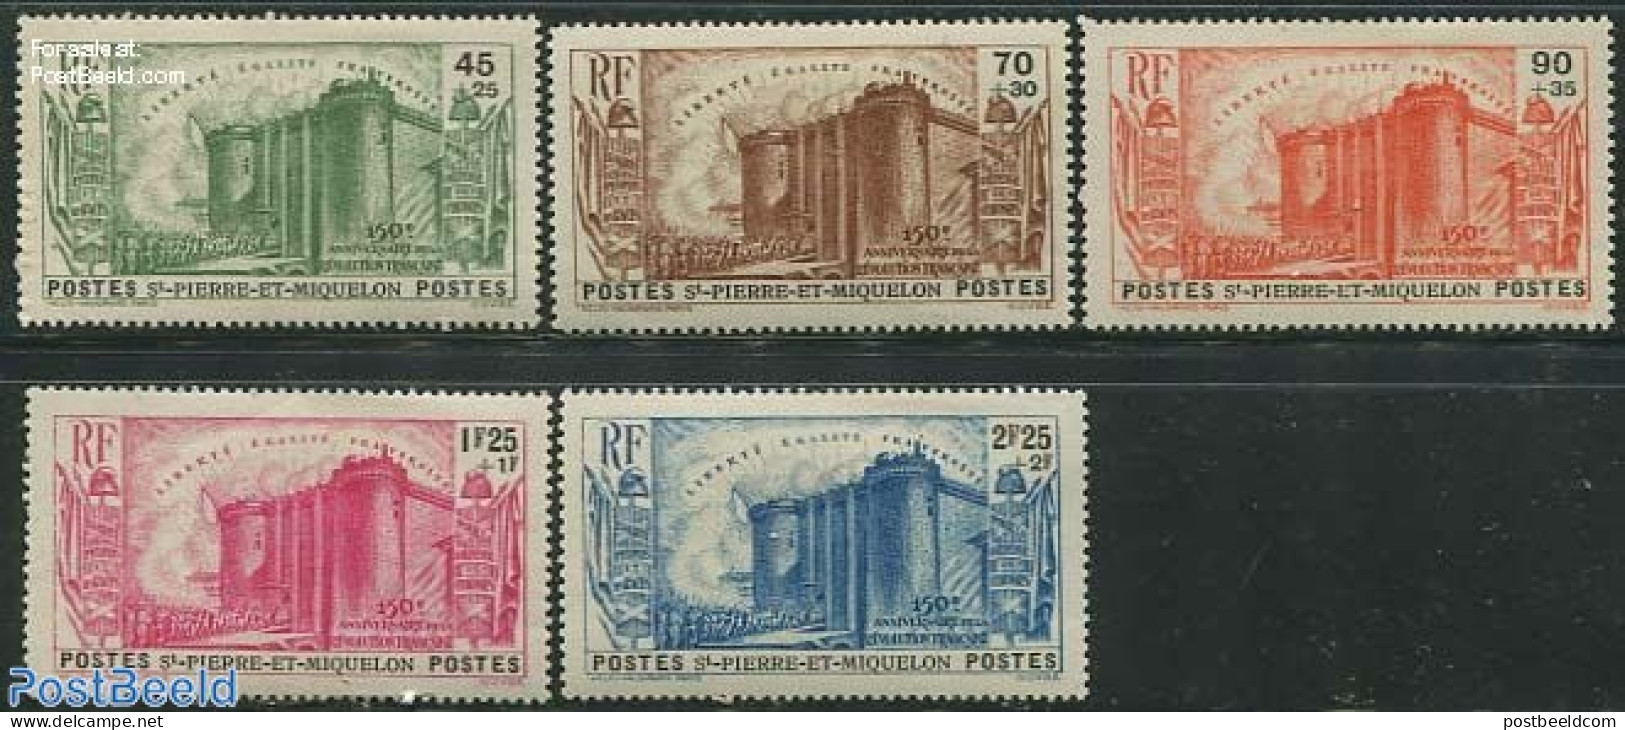 Saint Pierre And Miquelon 1939 French Revolution 5v, Unused (hinged), Art - Castles & Fortifications - Castles